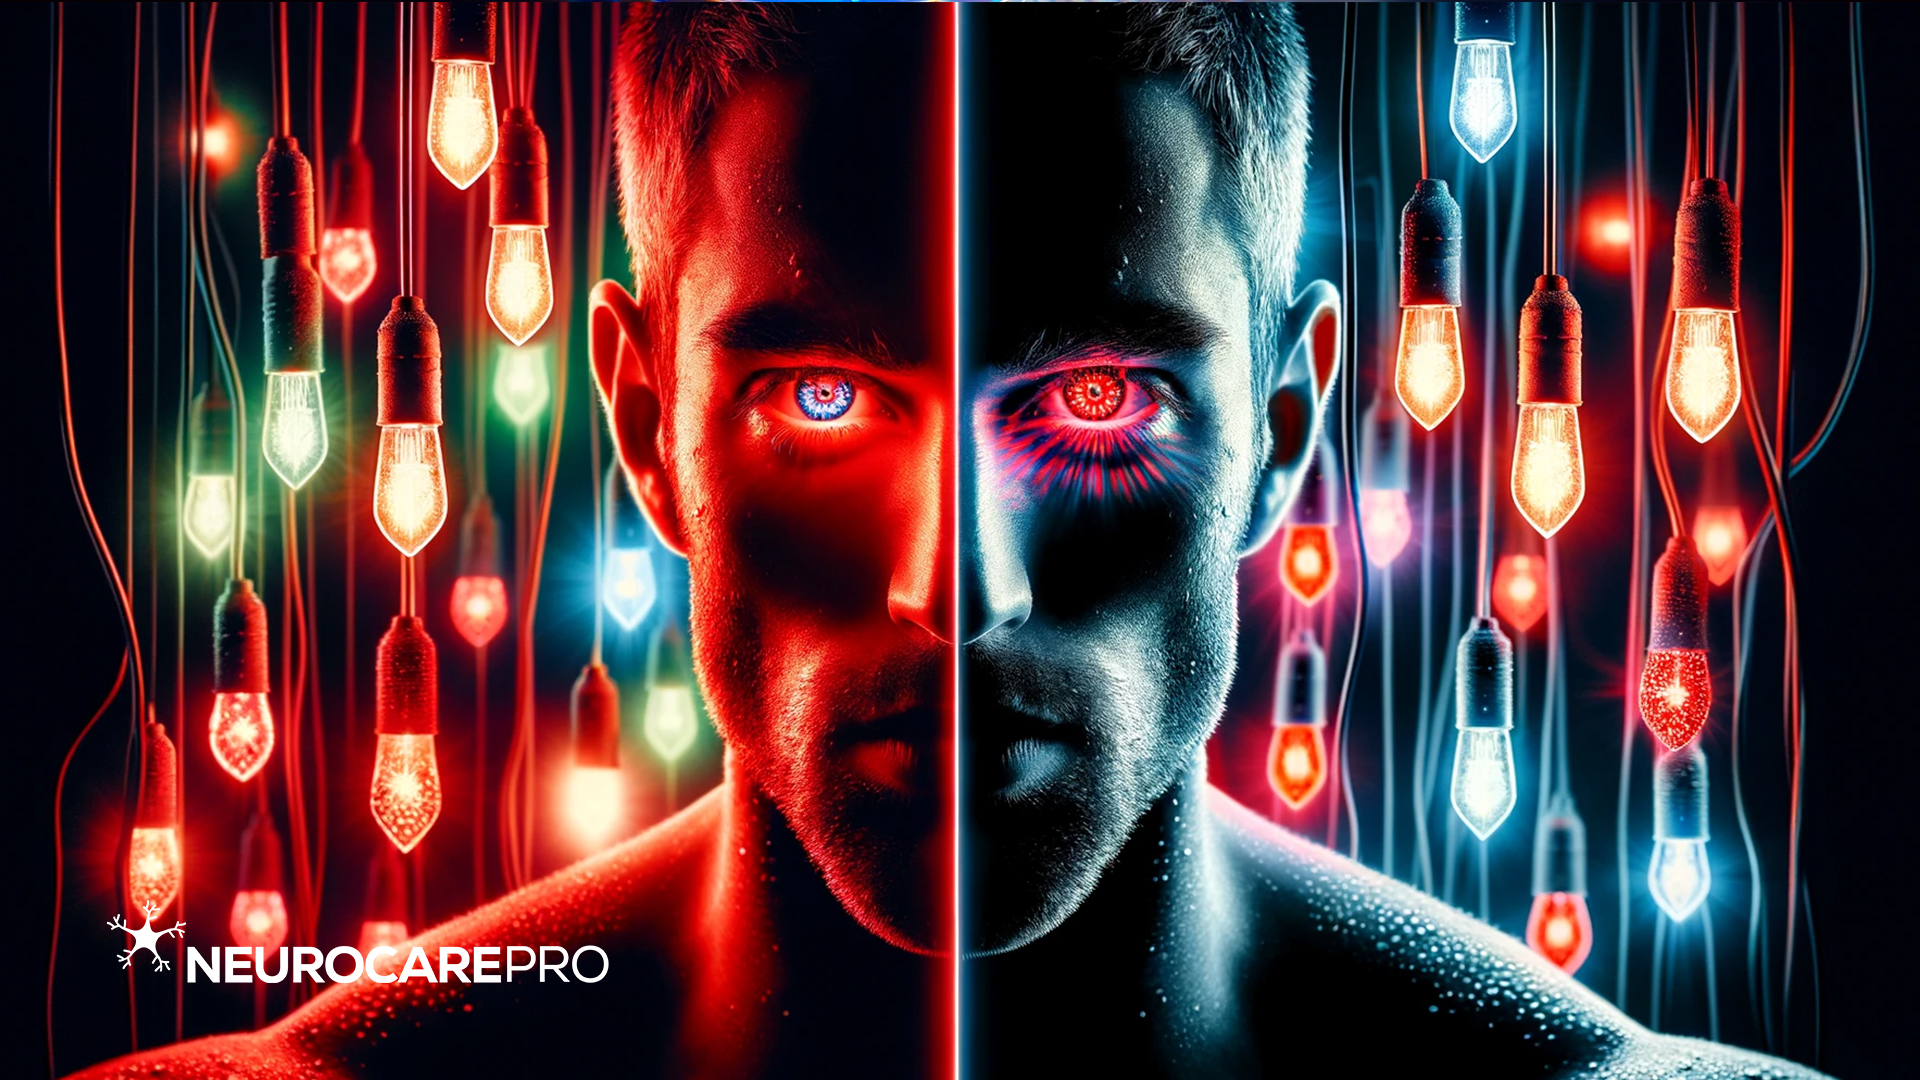 christmas lights versus red light therapy leds